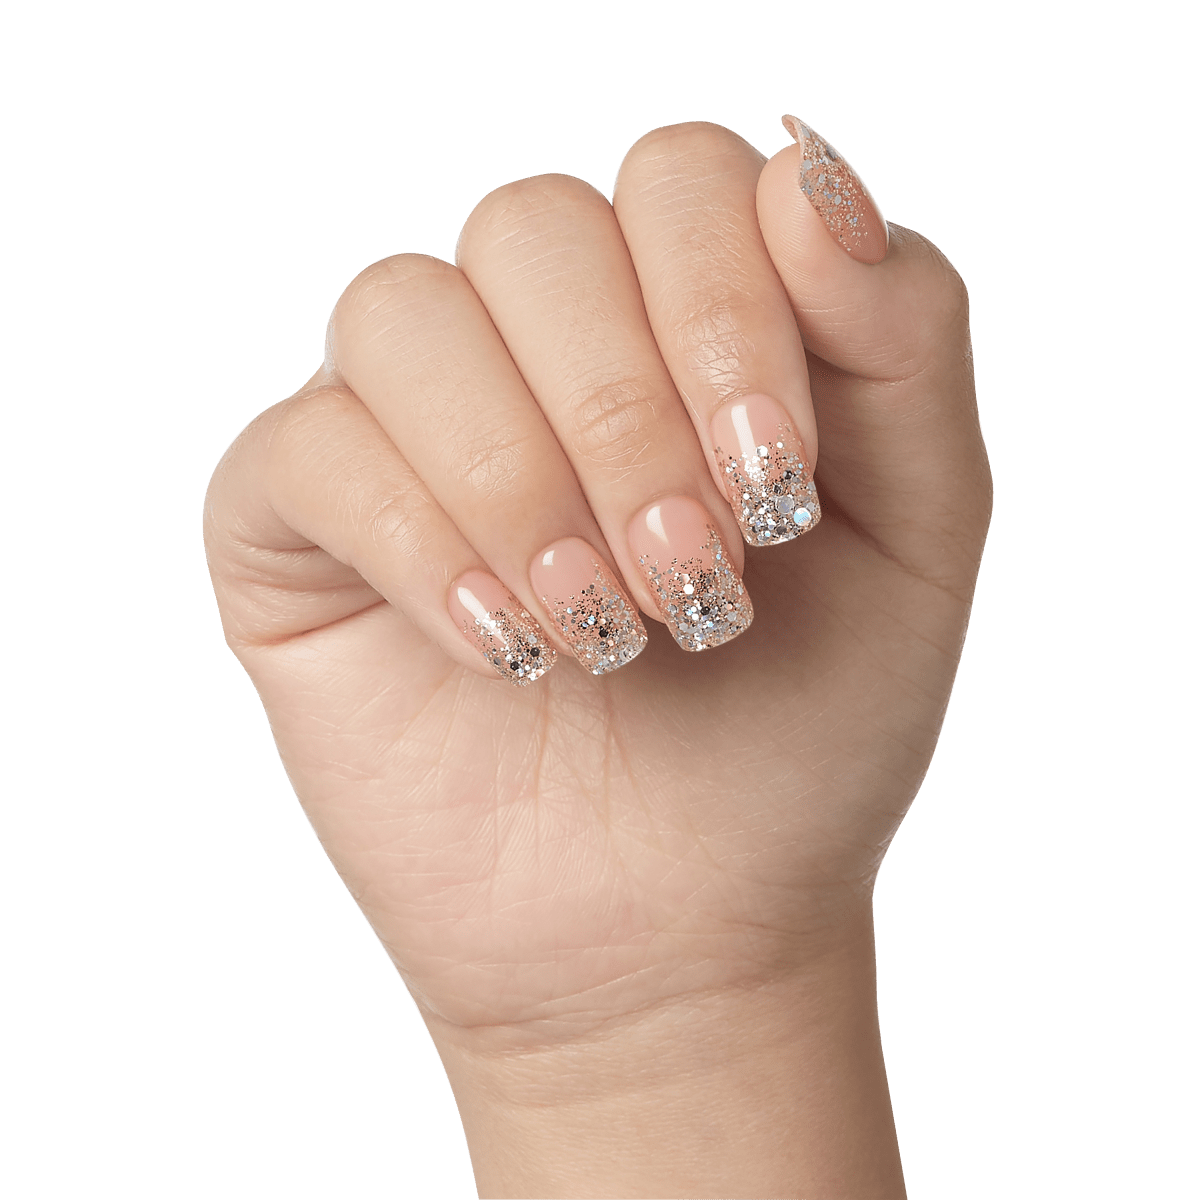 BLING IT UP! - Suzie's 5 Minute Mani - YouTube